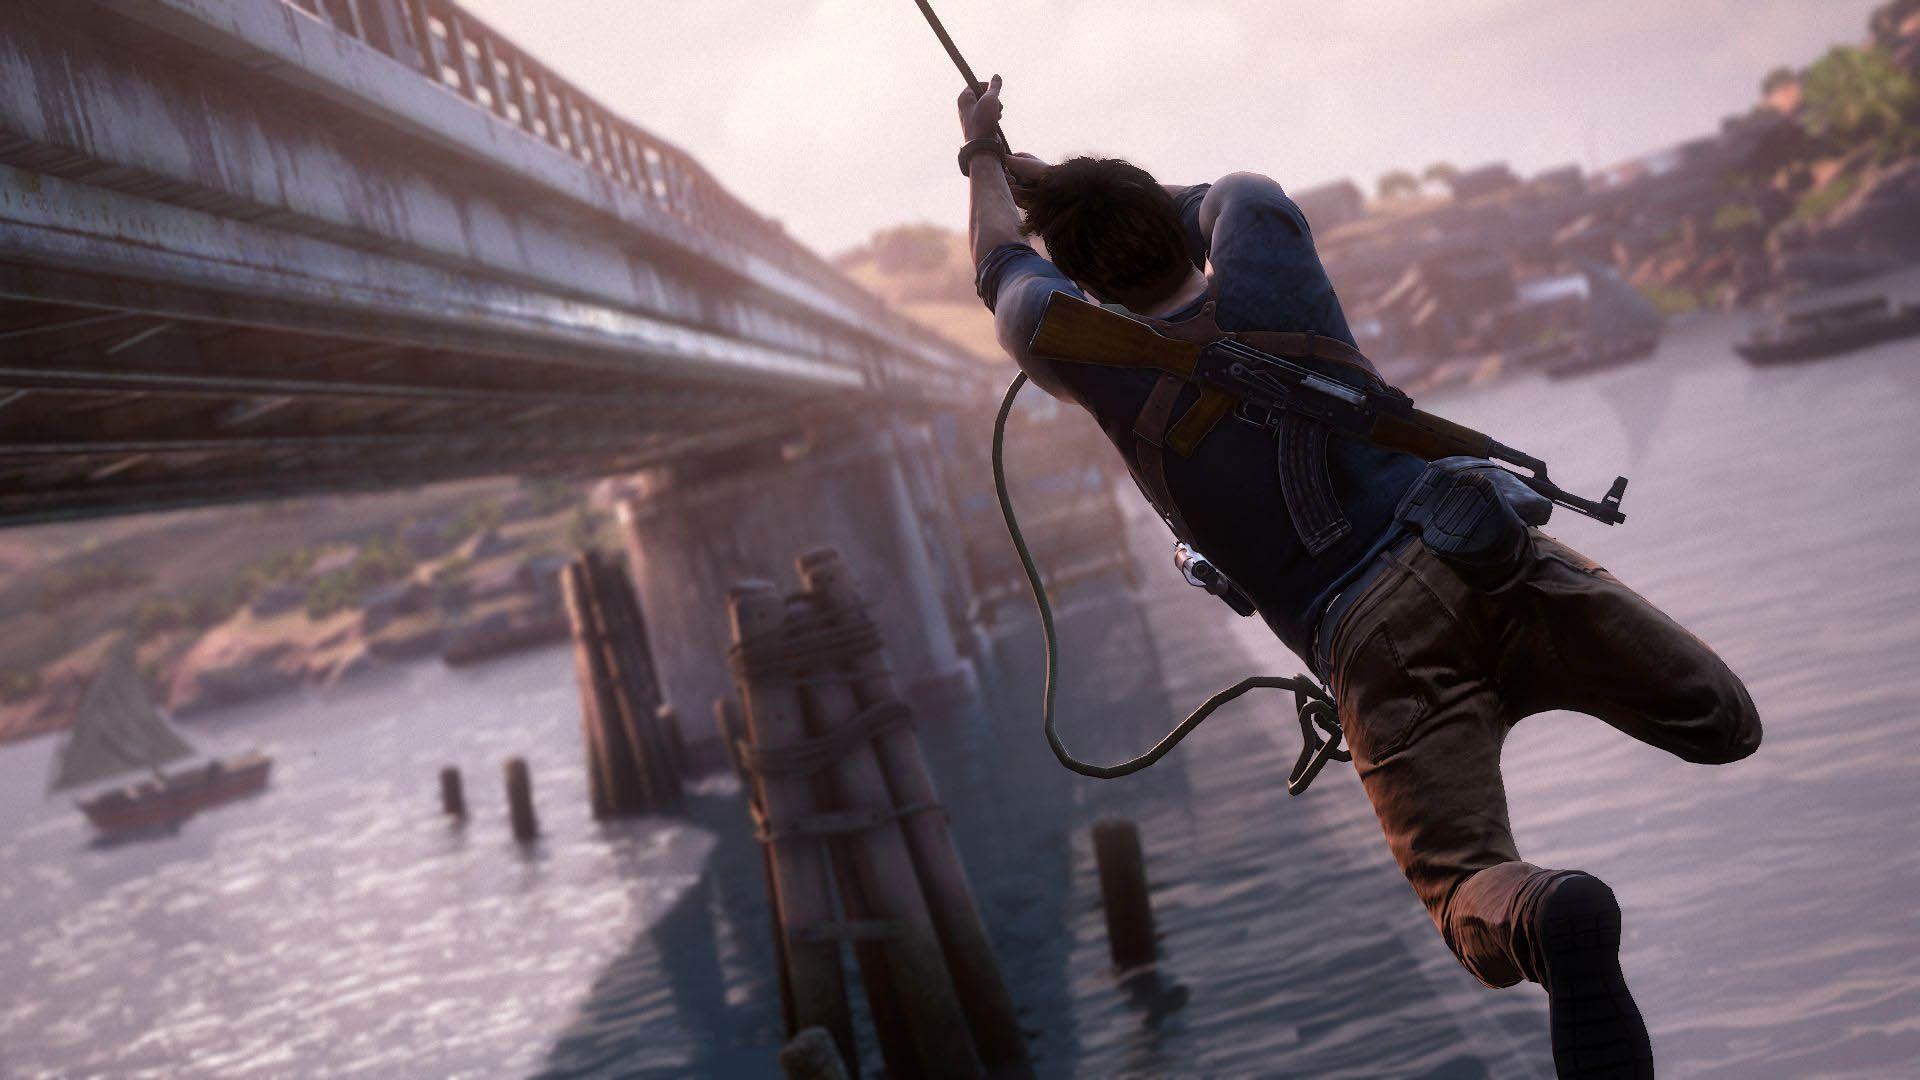 Uncharted 4: A Thief&;s End Jump next to a Bridge